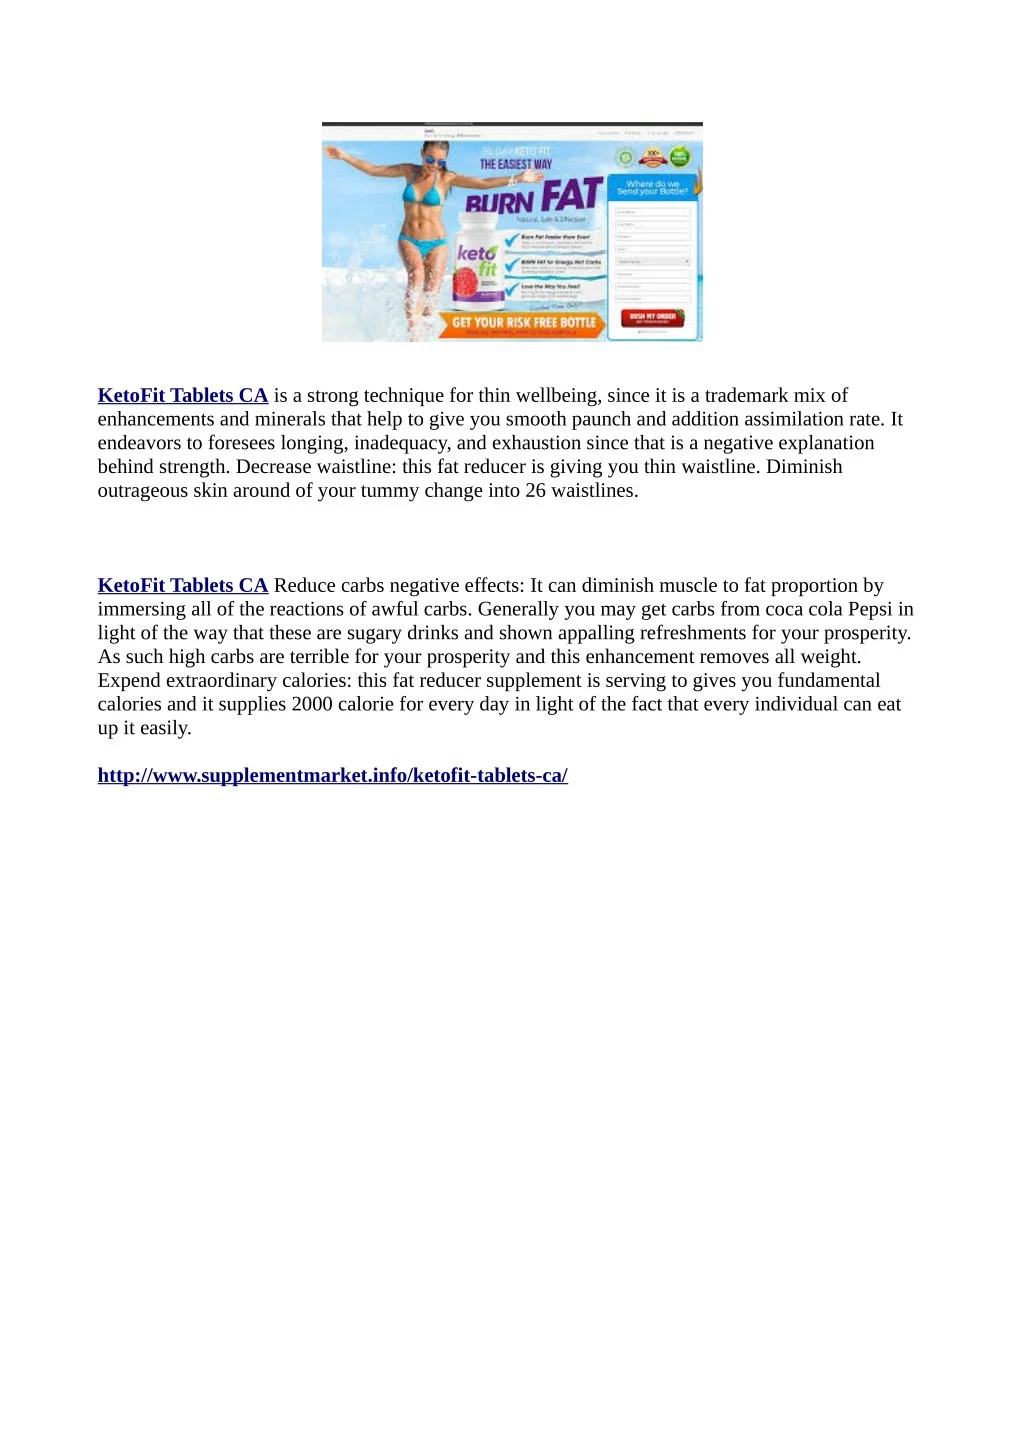 ketofit tablets ca is a strong technique for thin